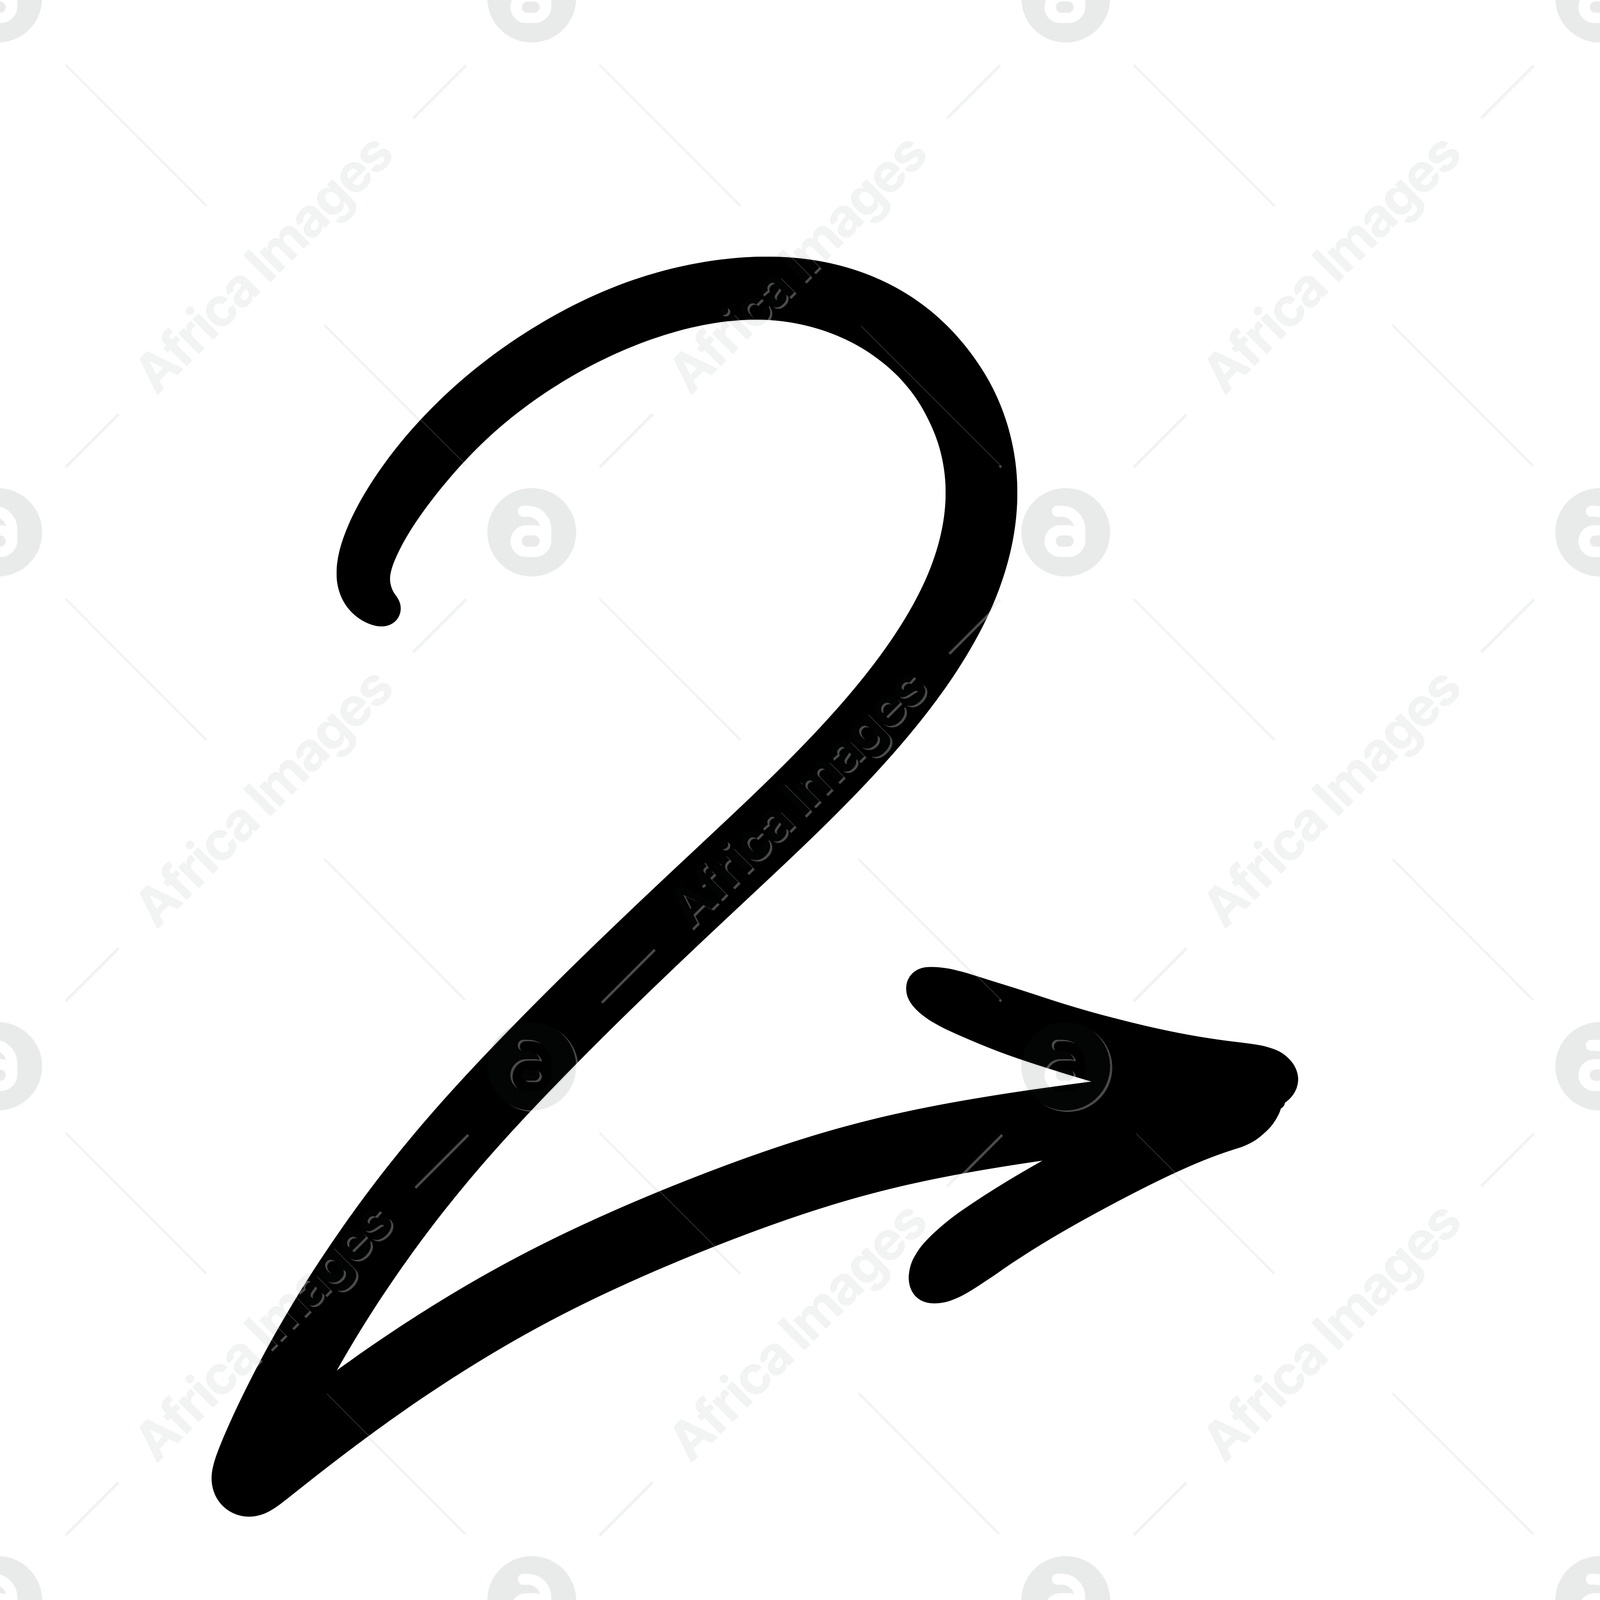 Image of One black drawn arrow isolated on white